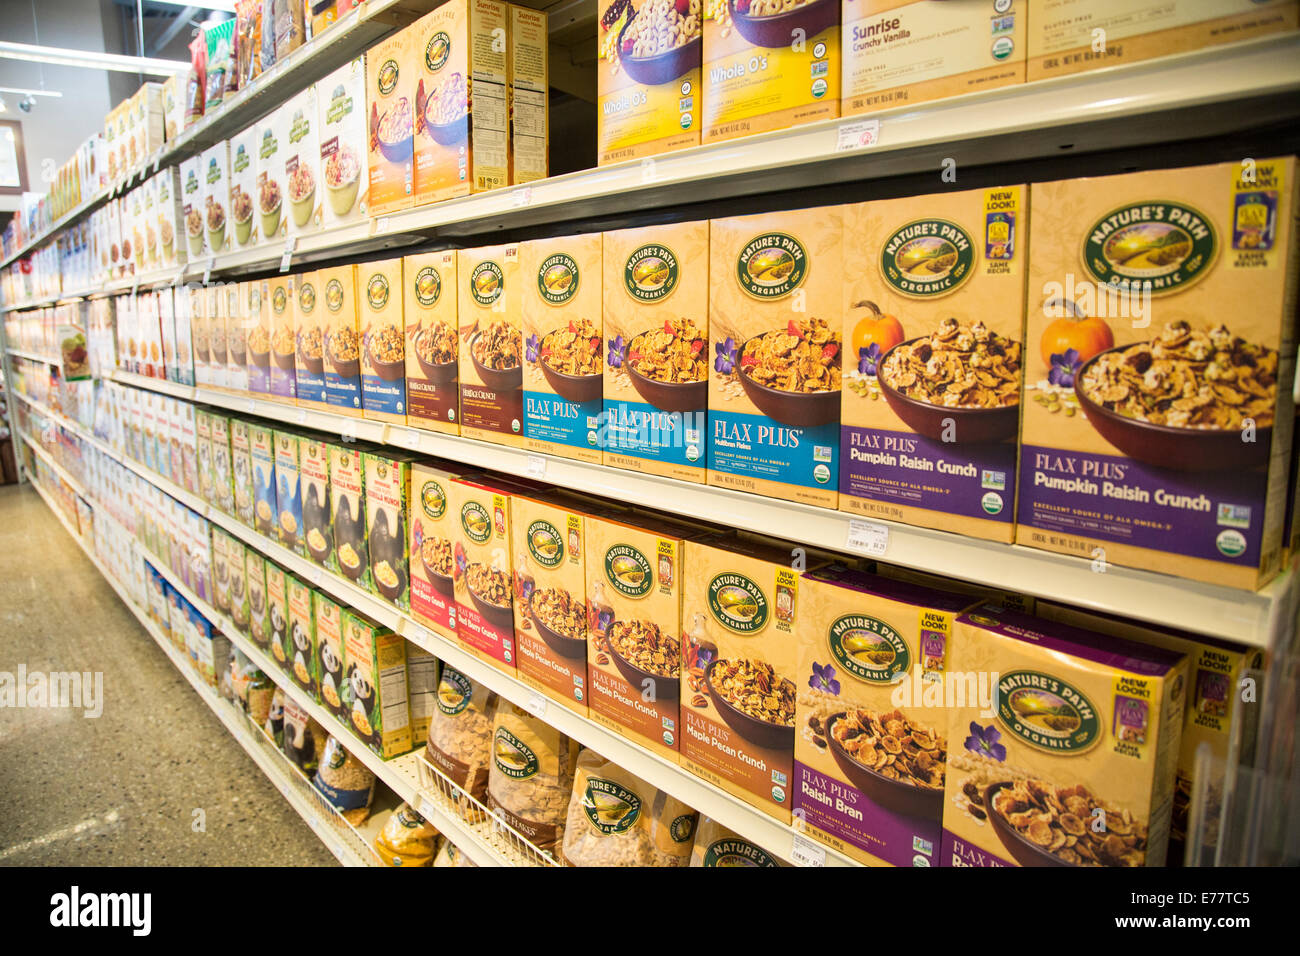 Organic breakfast cereal boxes on the shelves of a natural foods grocery store. Stock Photo